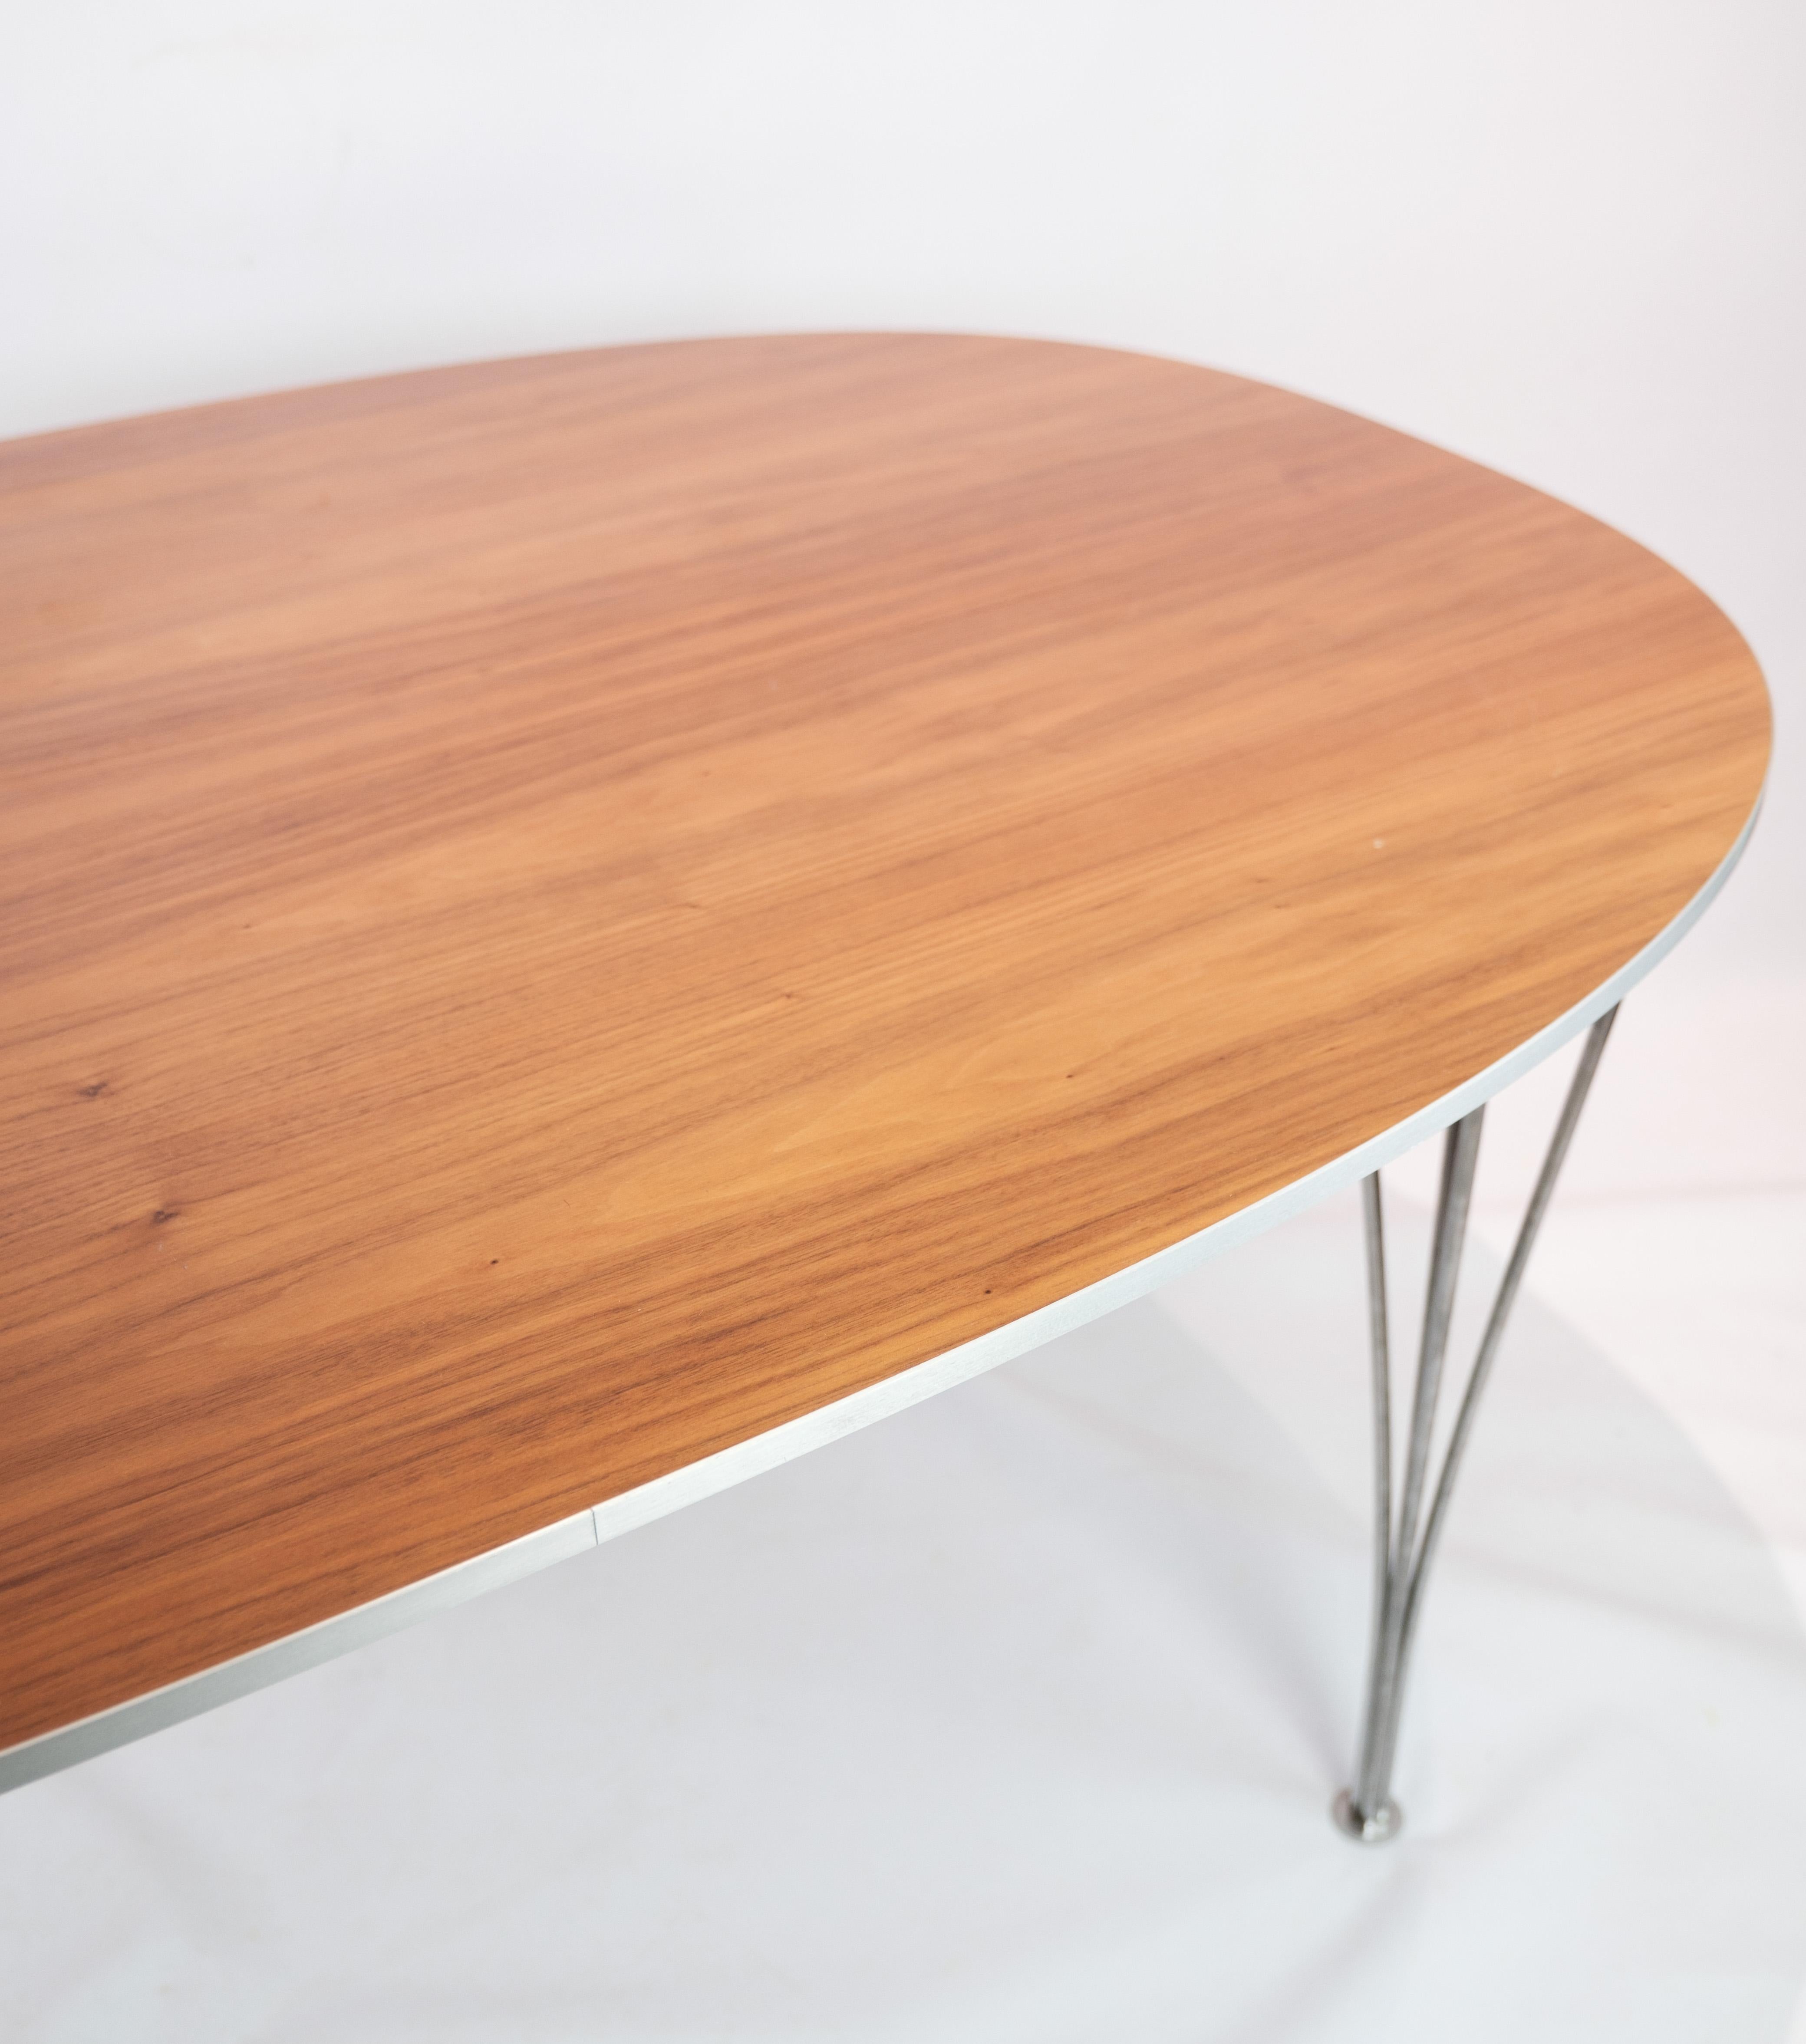 Mid-20th Century Piet Hein Table, Model B612 with Walnut Surface and Steel Legs